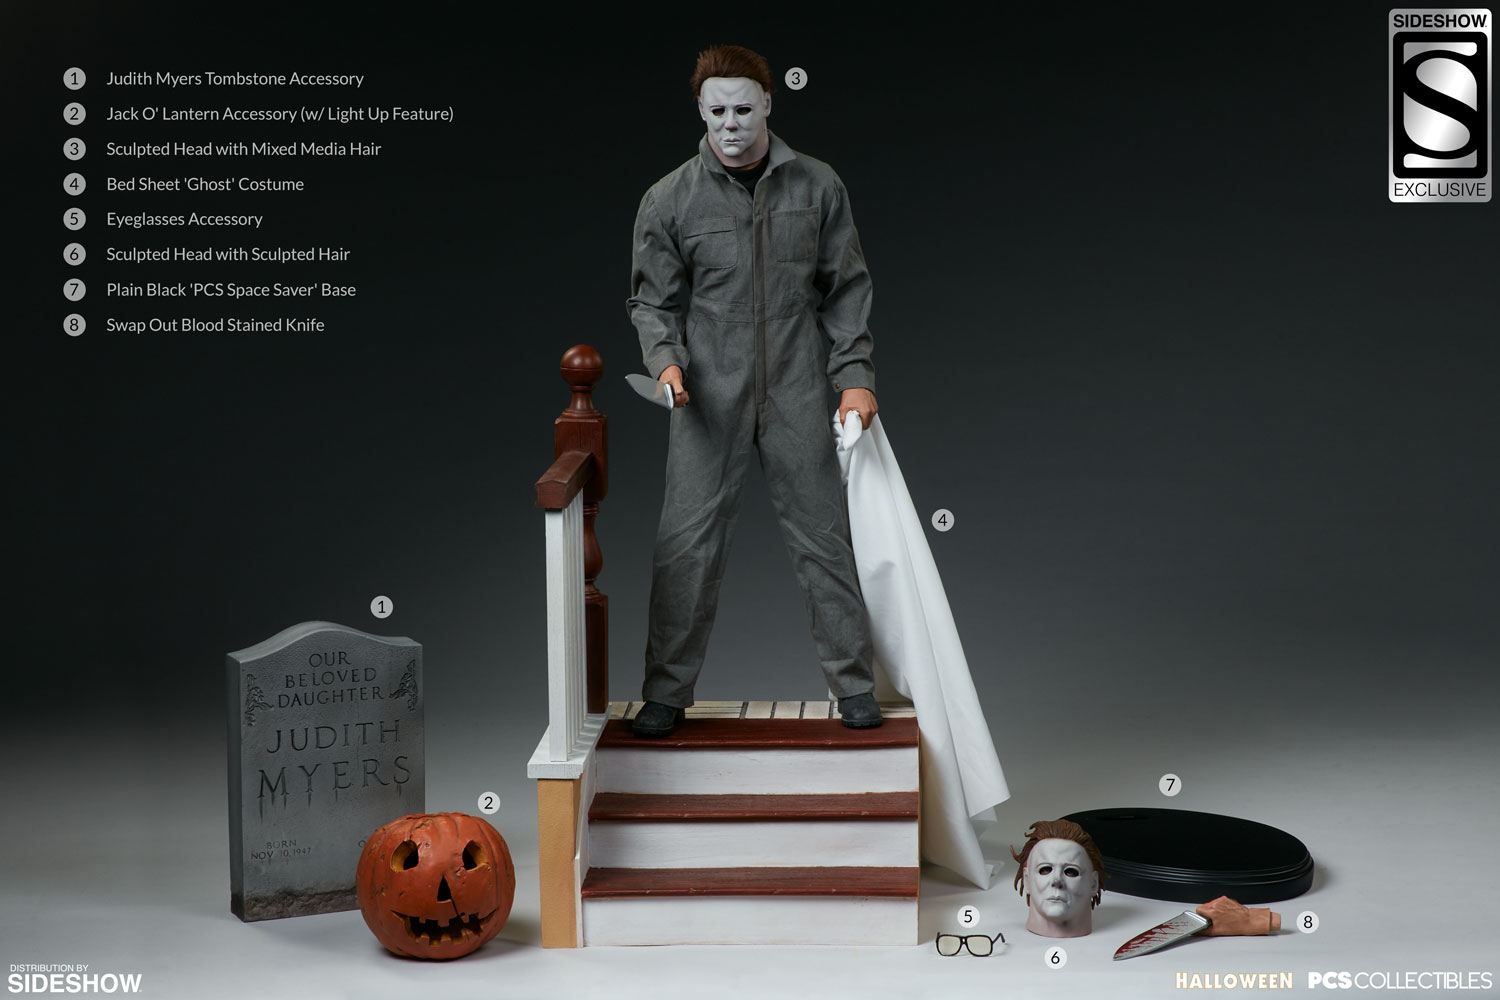 Michael Myers Exclusive Edition.